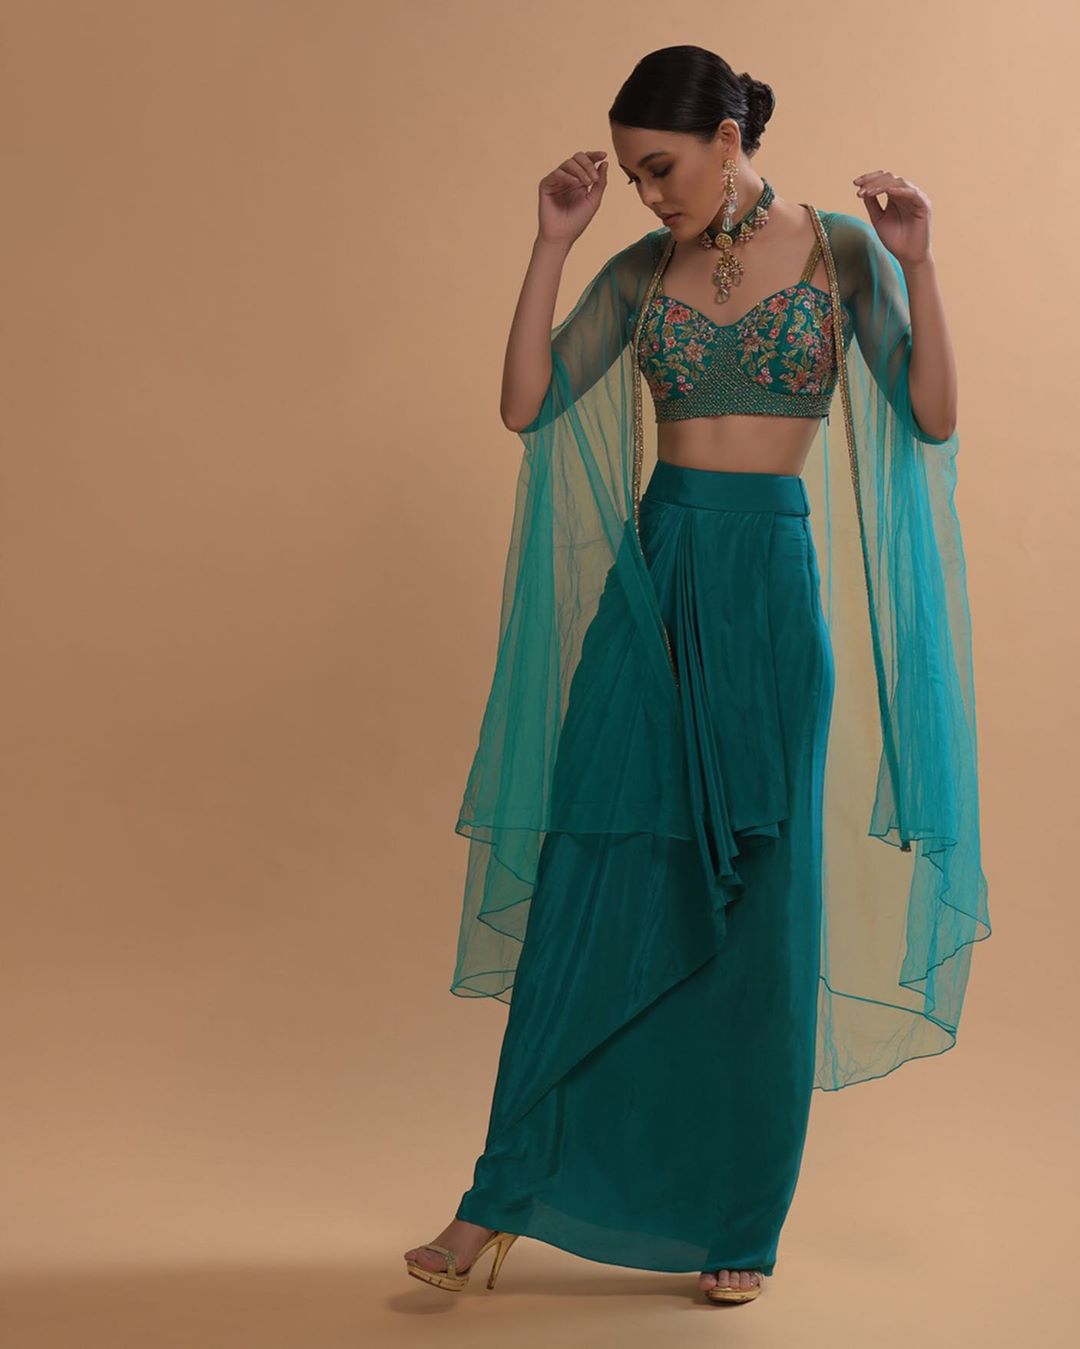 KALKI Fashion - #kalkixkesa🧚🏻
#TealWatersSeries
Painstaking autumn sequins and hand-done French-knots on luxe silks in an opulent hue in deep water renders this fancy draped skirt style as extraordina...